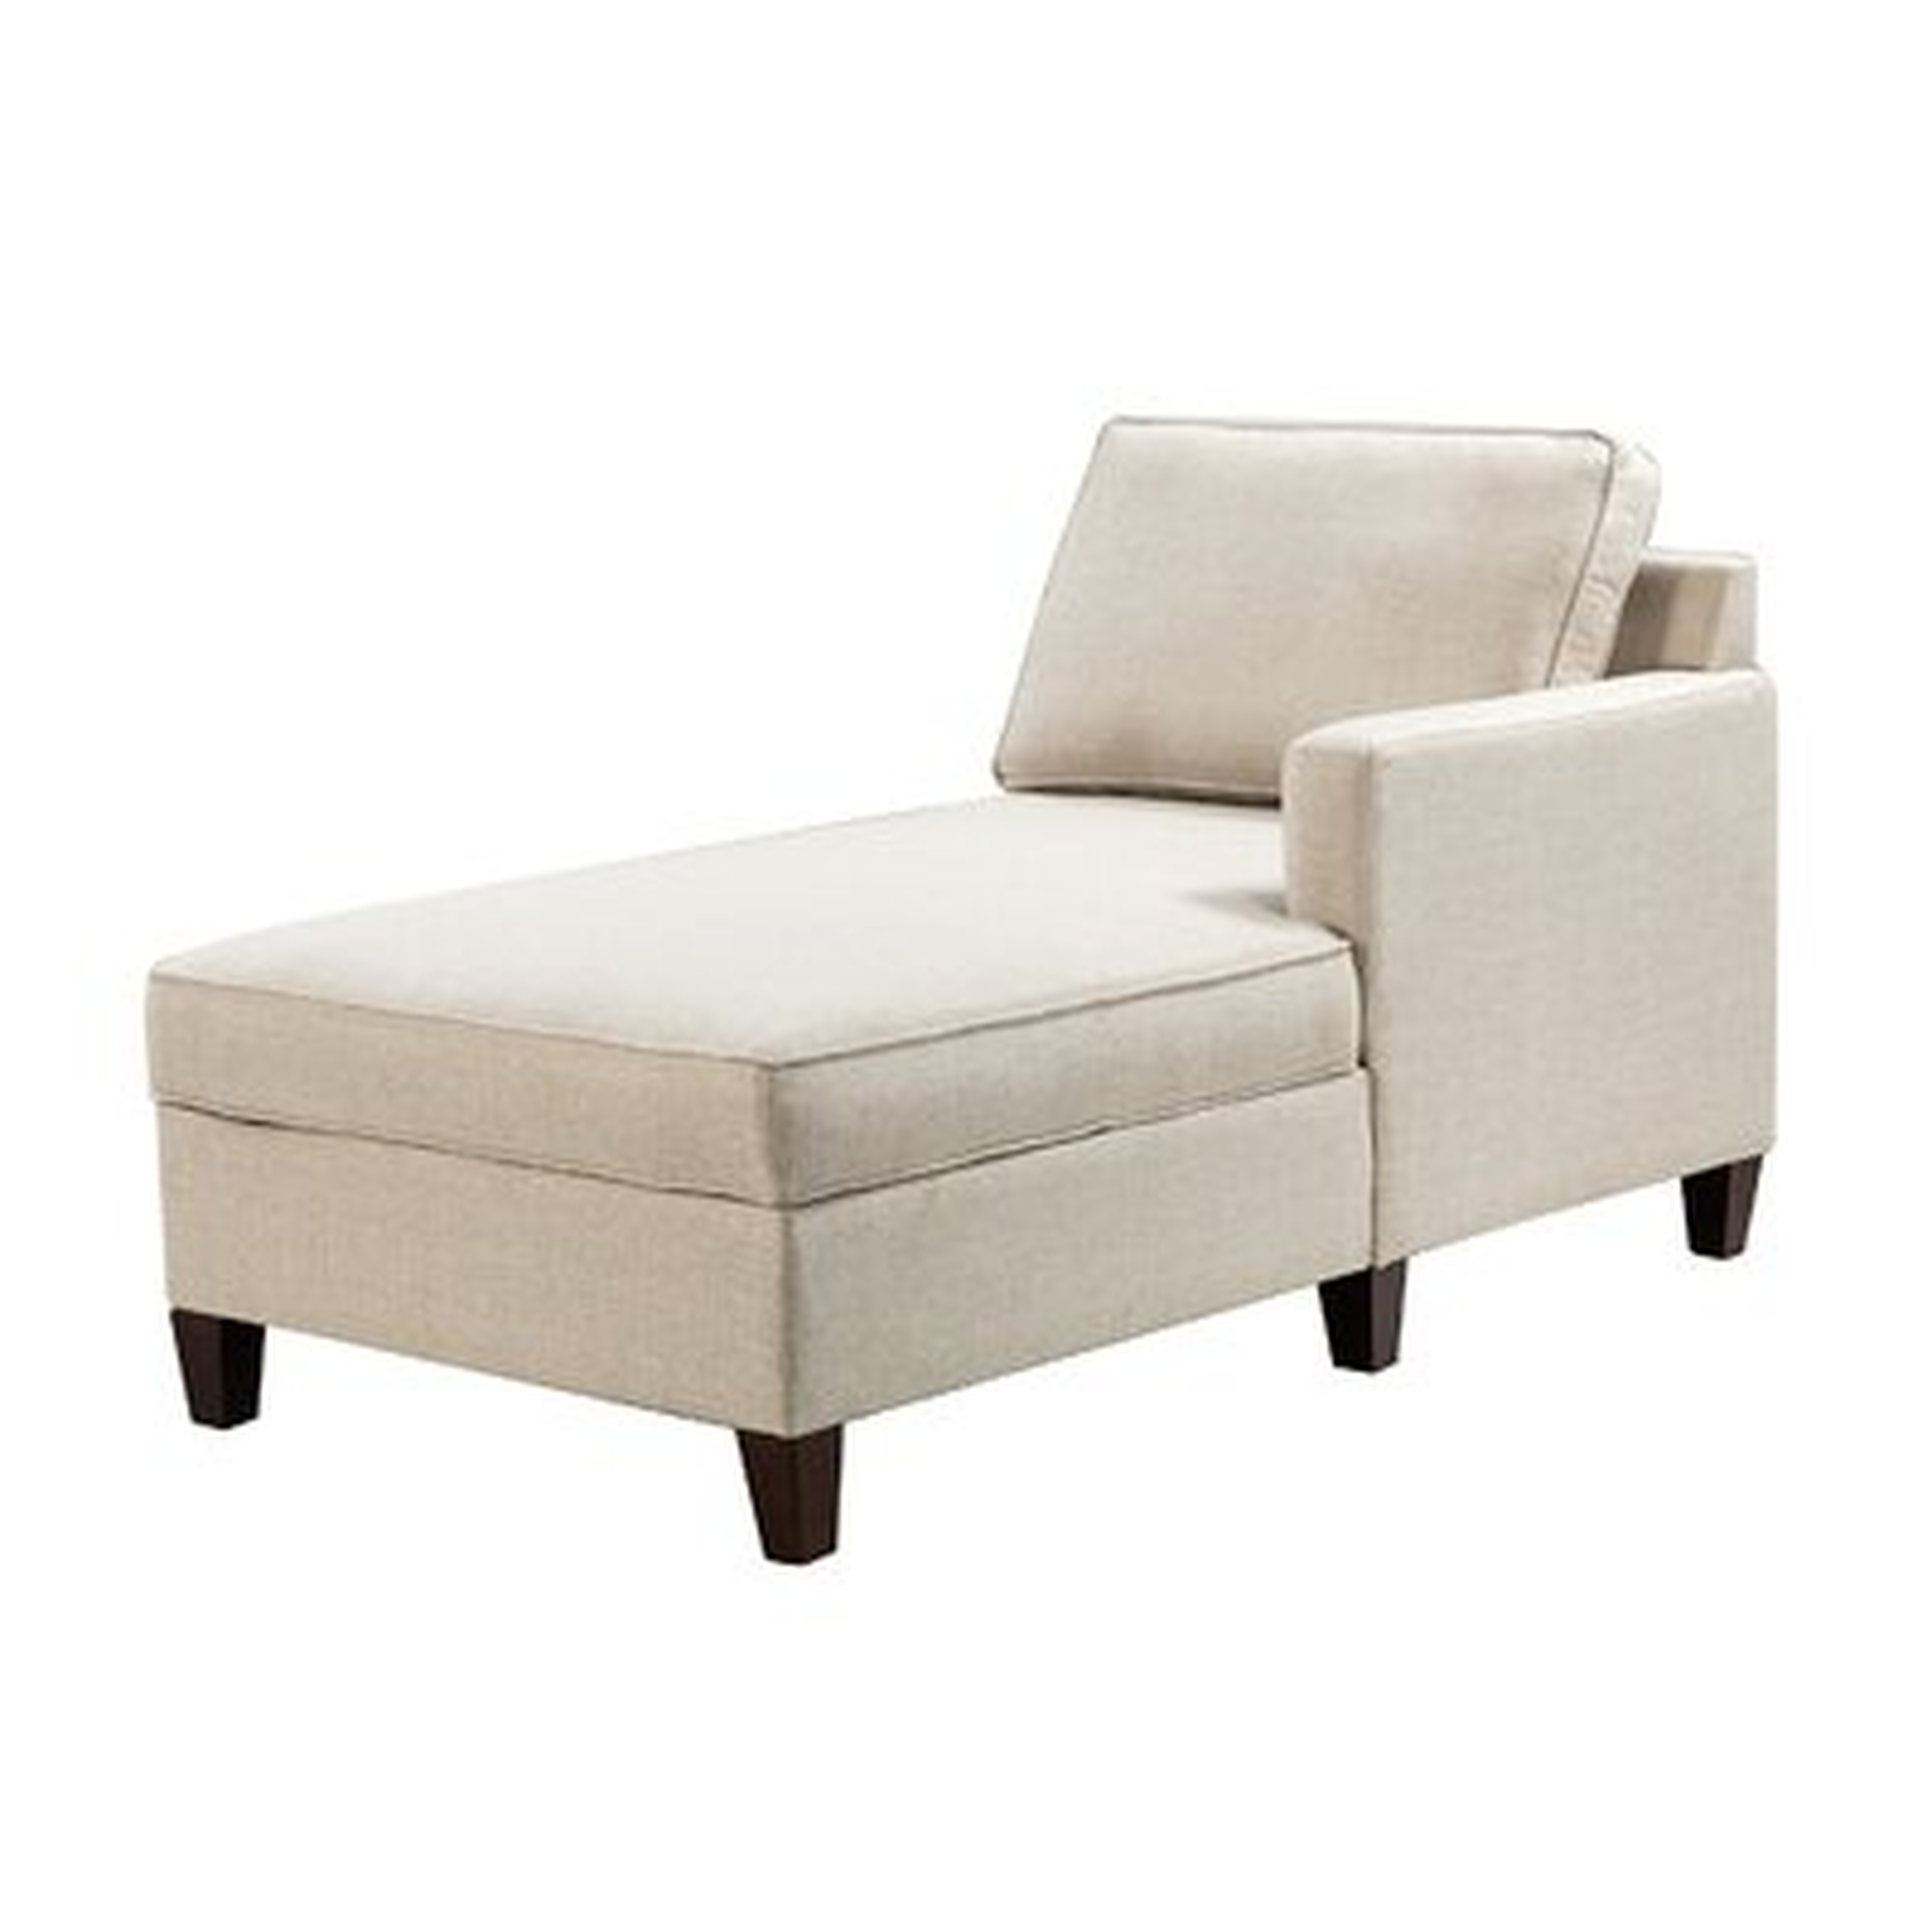 Booneville Upholstered Chaise Lounge - Wayfair